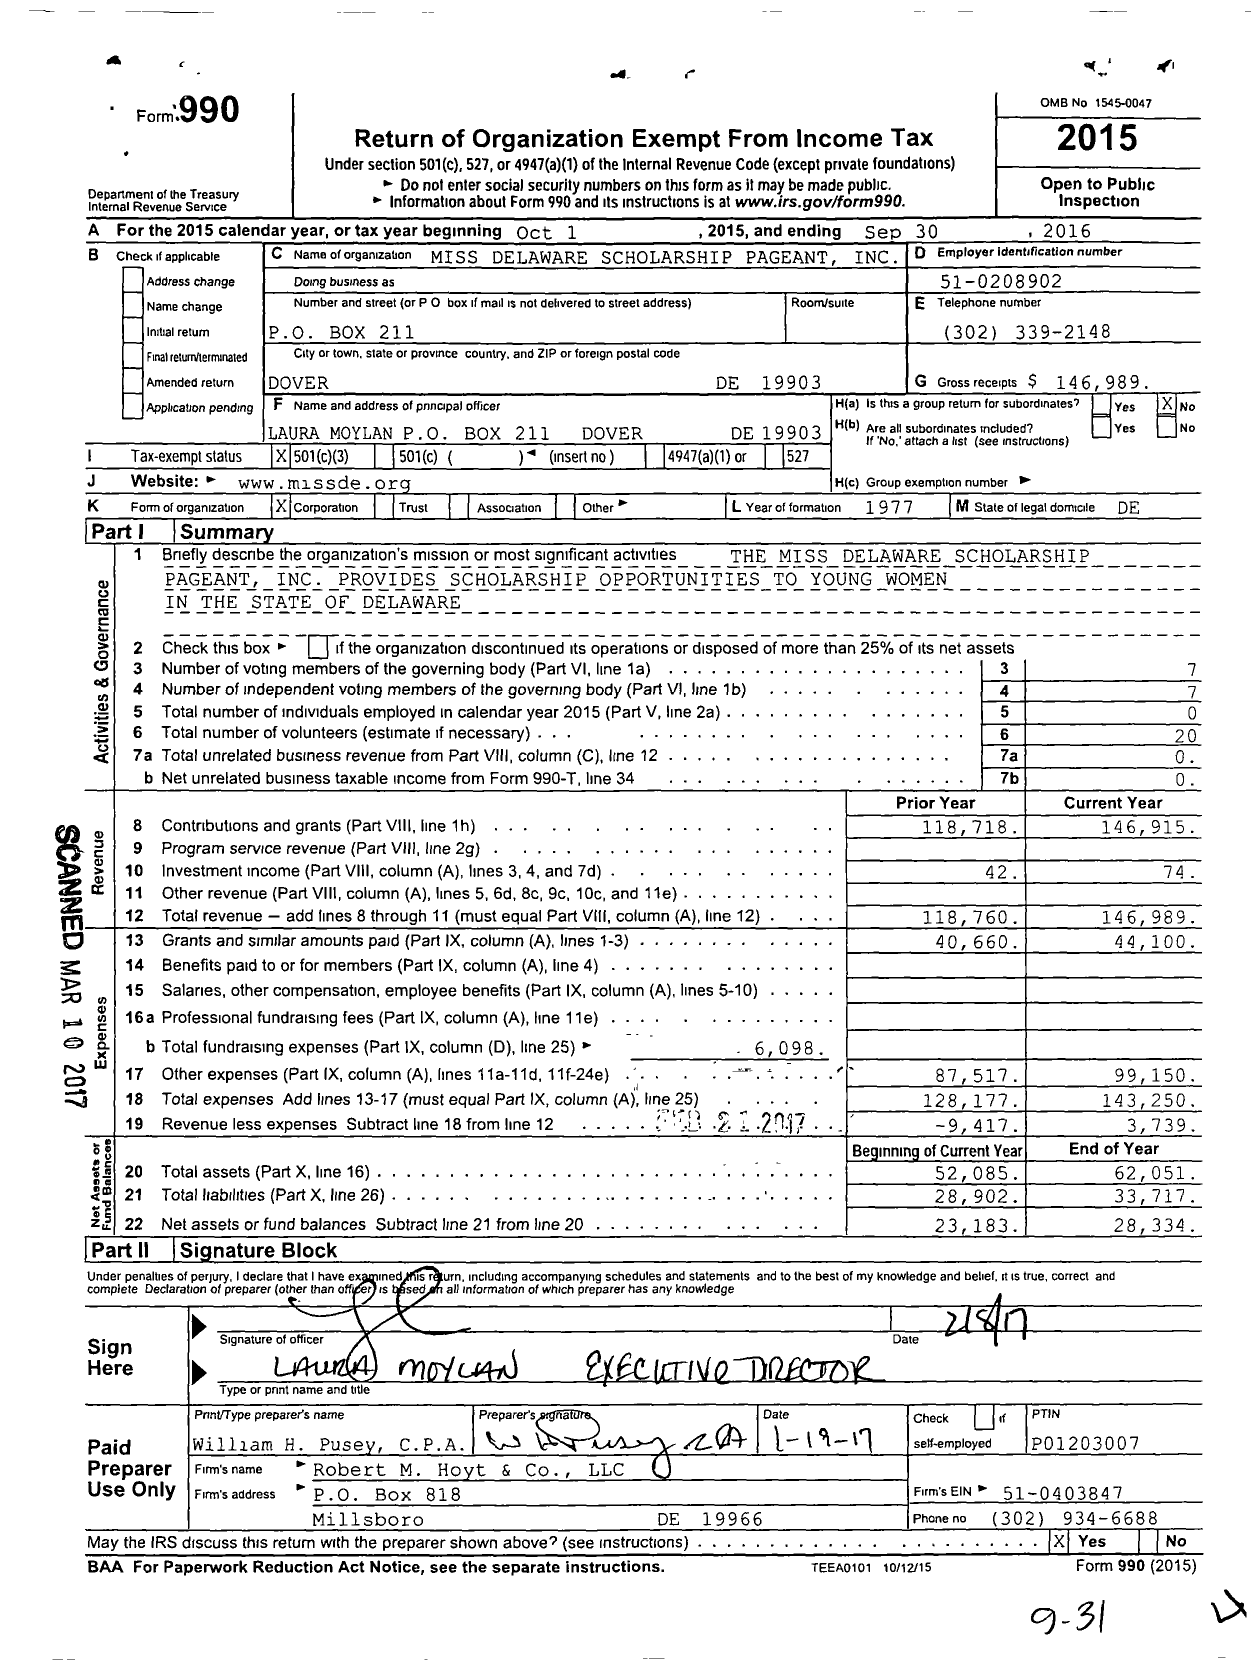 Image of first page of 2015 Form 990 for Miss Delaware Scholarship Program